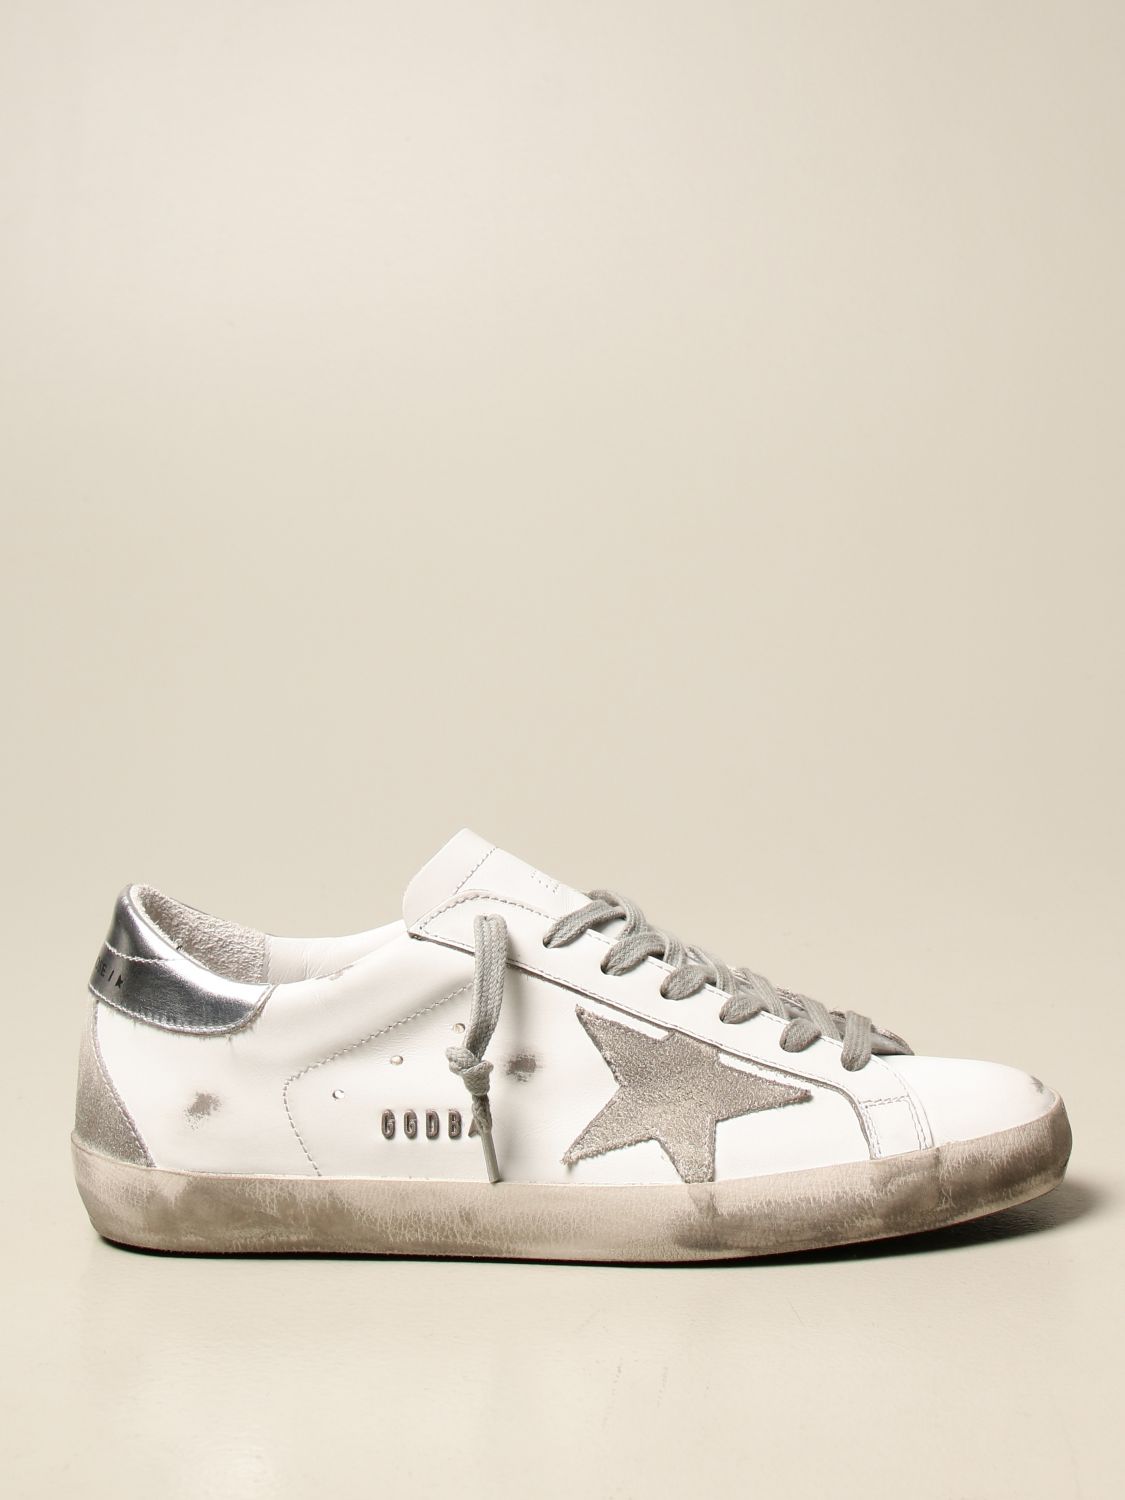 GOLDEN GOOSE: classic sneakers in leather | Sneakers Golden Men White | Sneakers Golden Goose GMF00102.F000317.10273 GIGLIO.COM